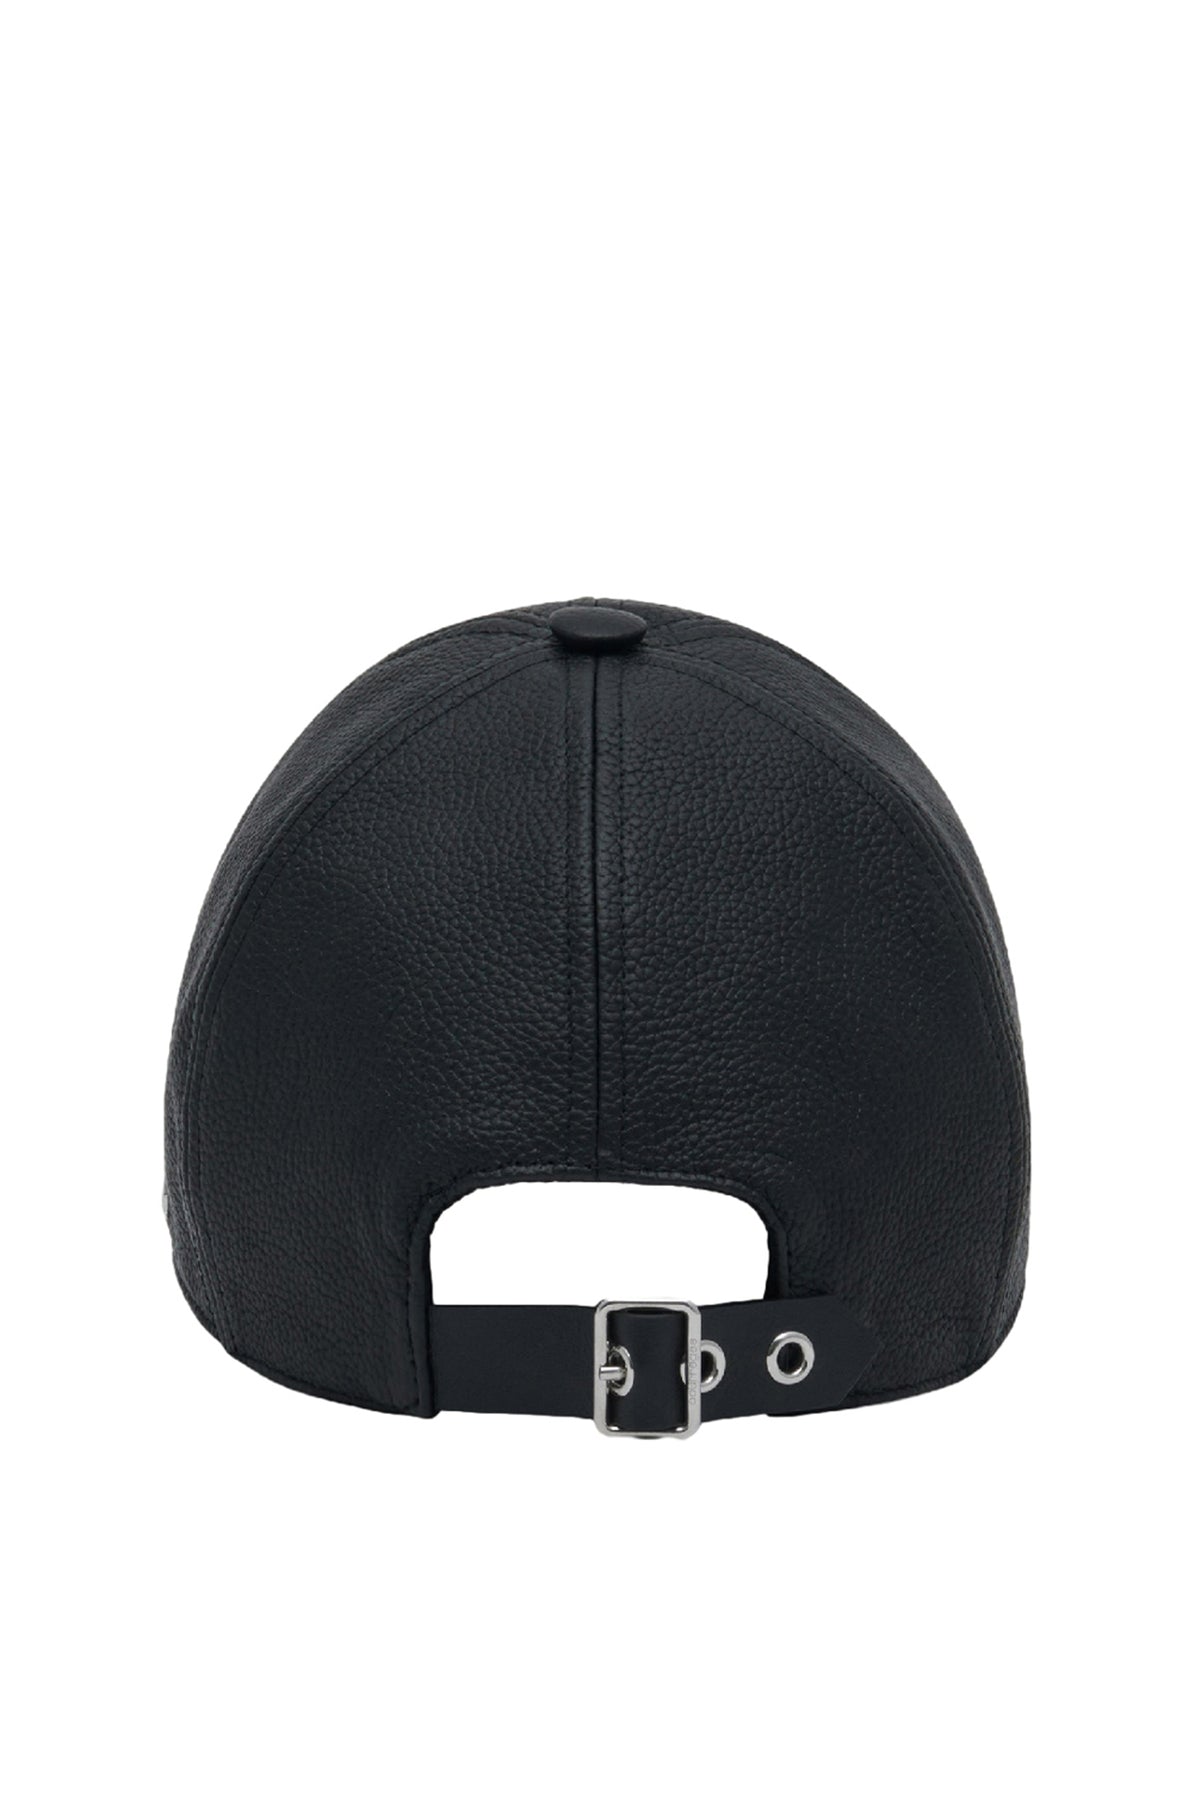 GOGO GRAINED LEATHER CAP / BLK